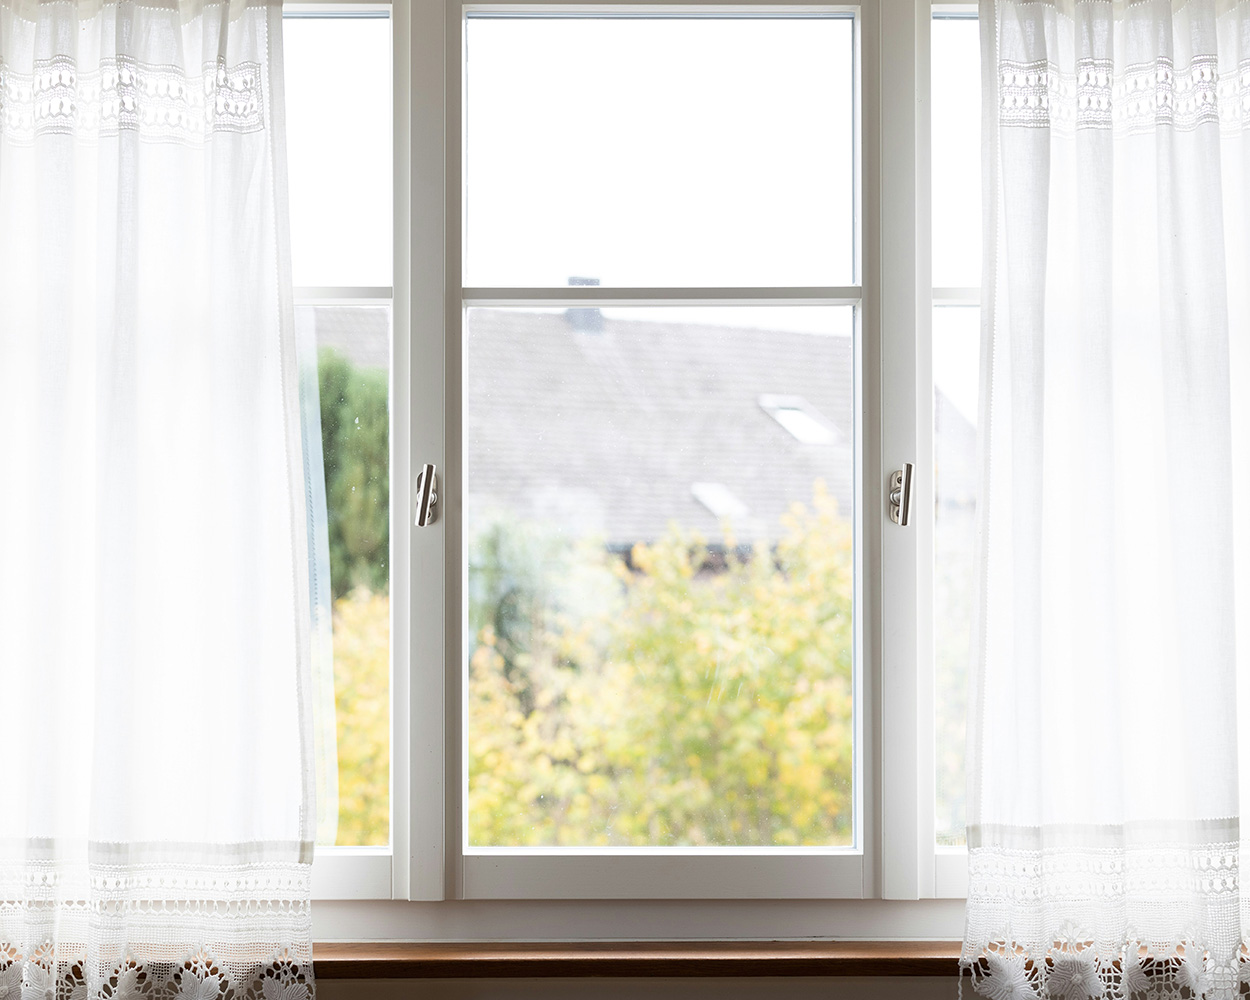 A view of a building and greenery through a window sill decorated with sheer white curtains.